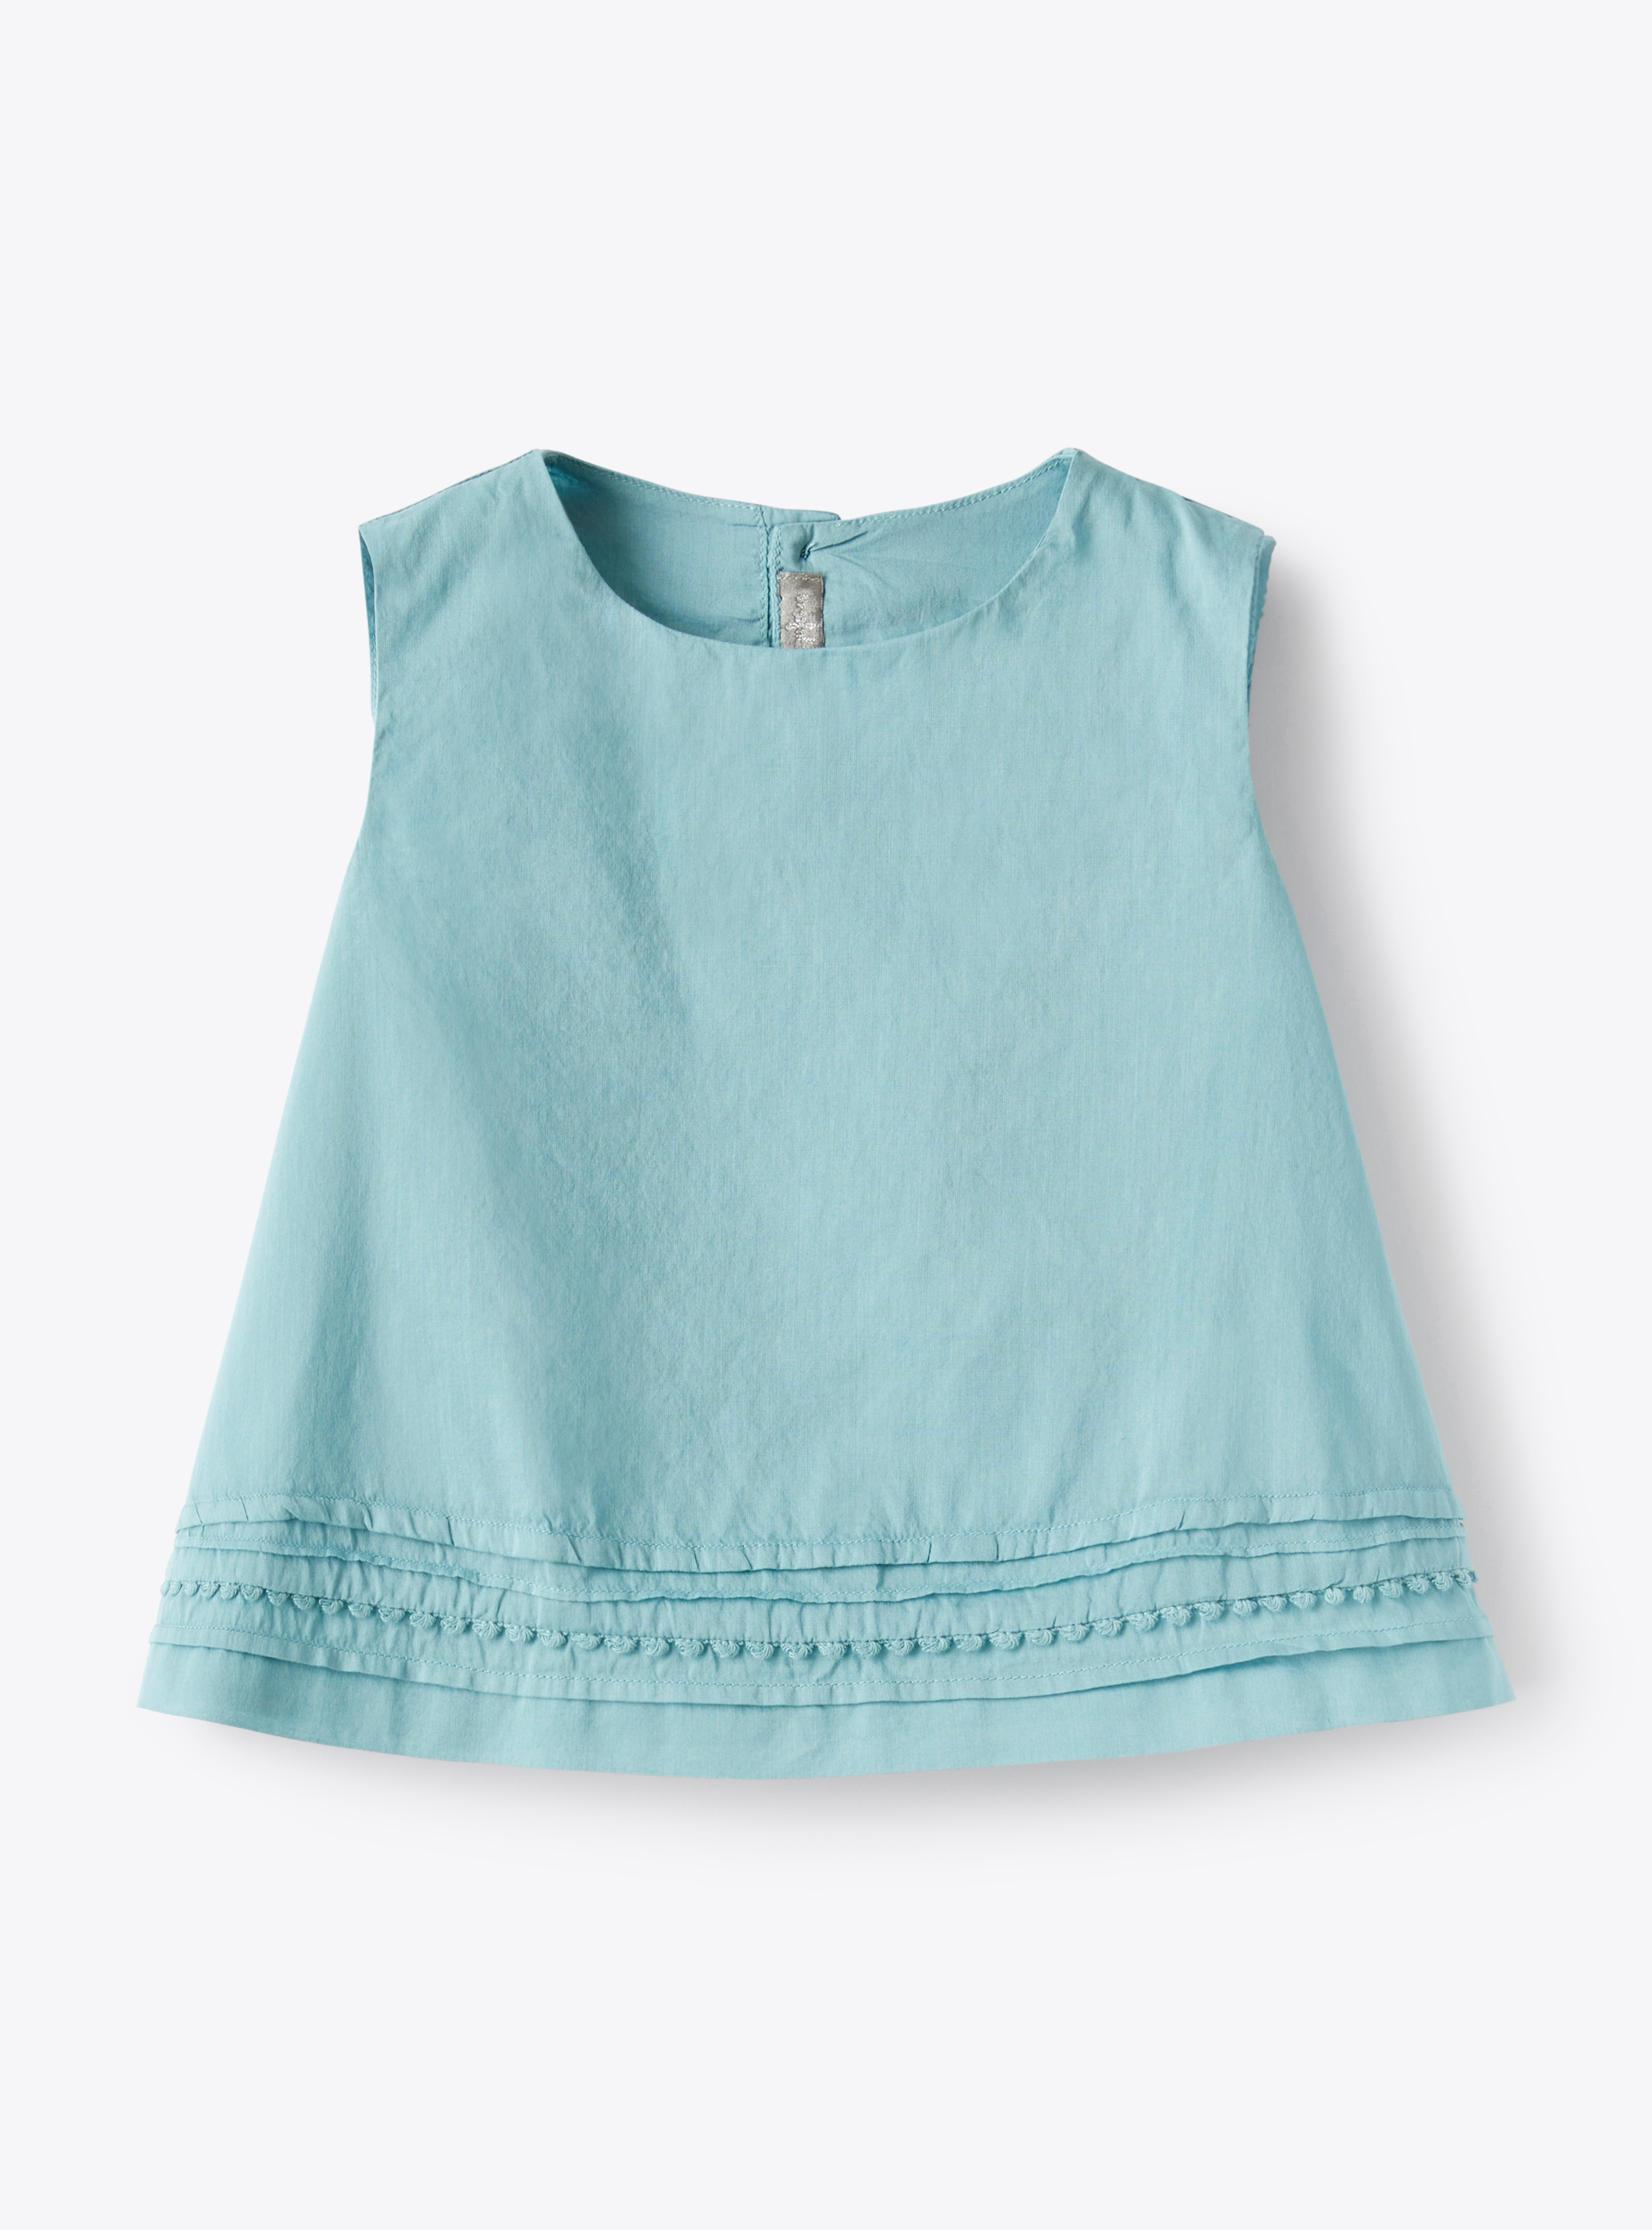 Top in eucalyptus-green cotton voile - Shirts - Il Gufo